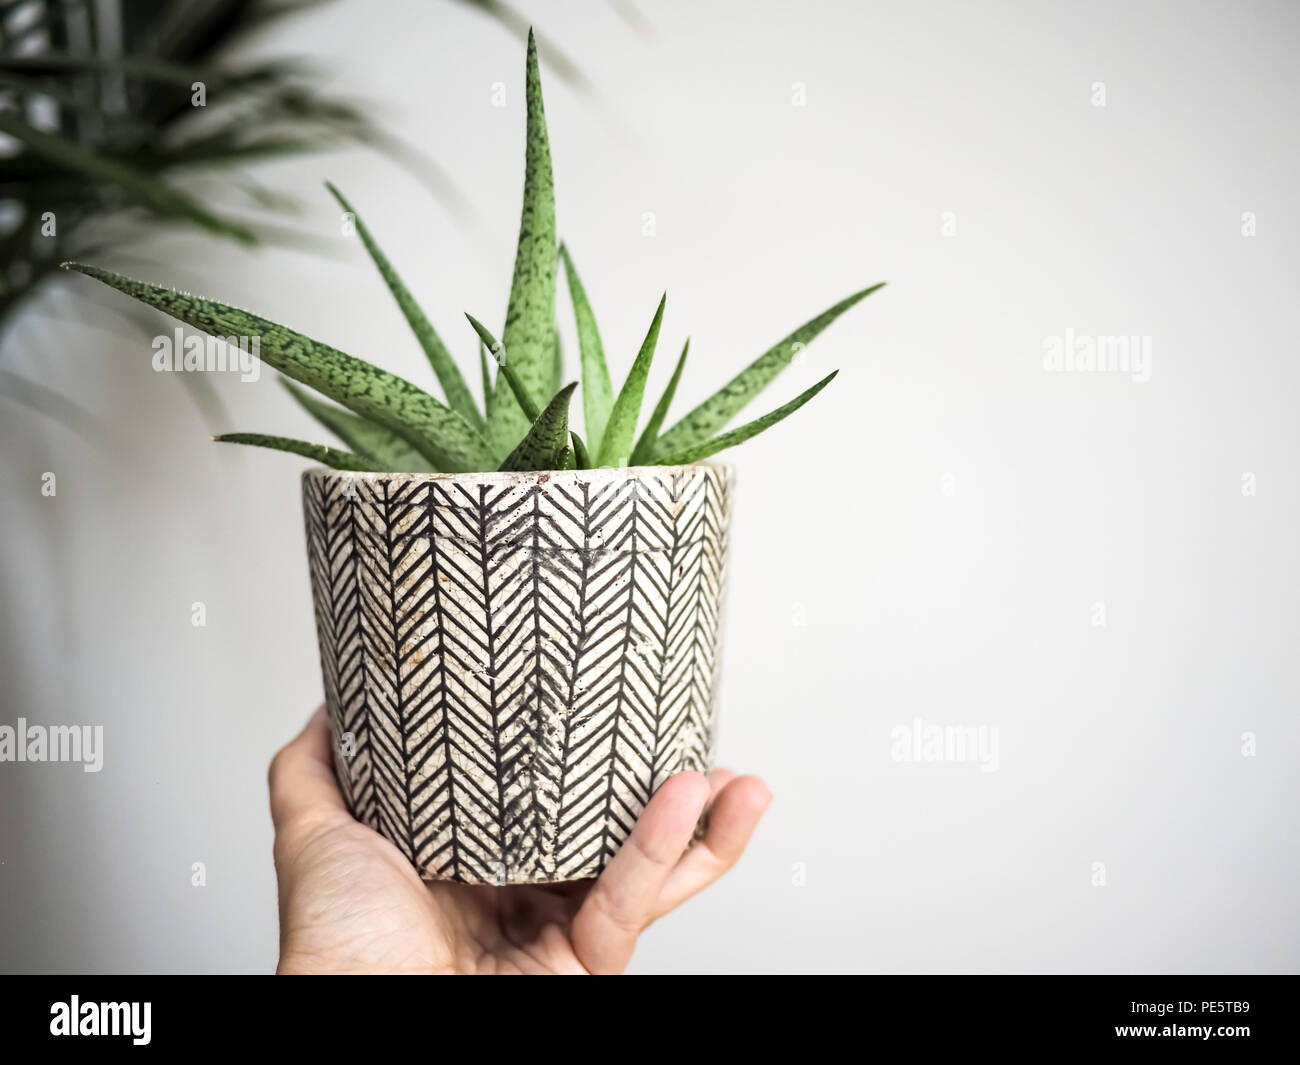 Hand holding a haworthia succulent in a striped pot against a white wall Stock Photo